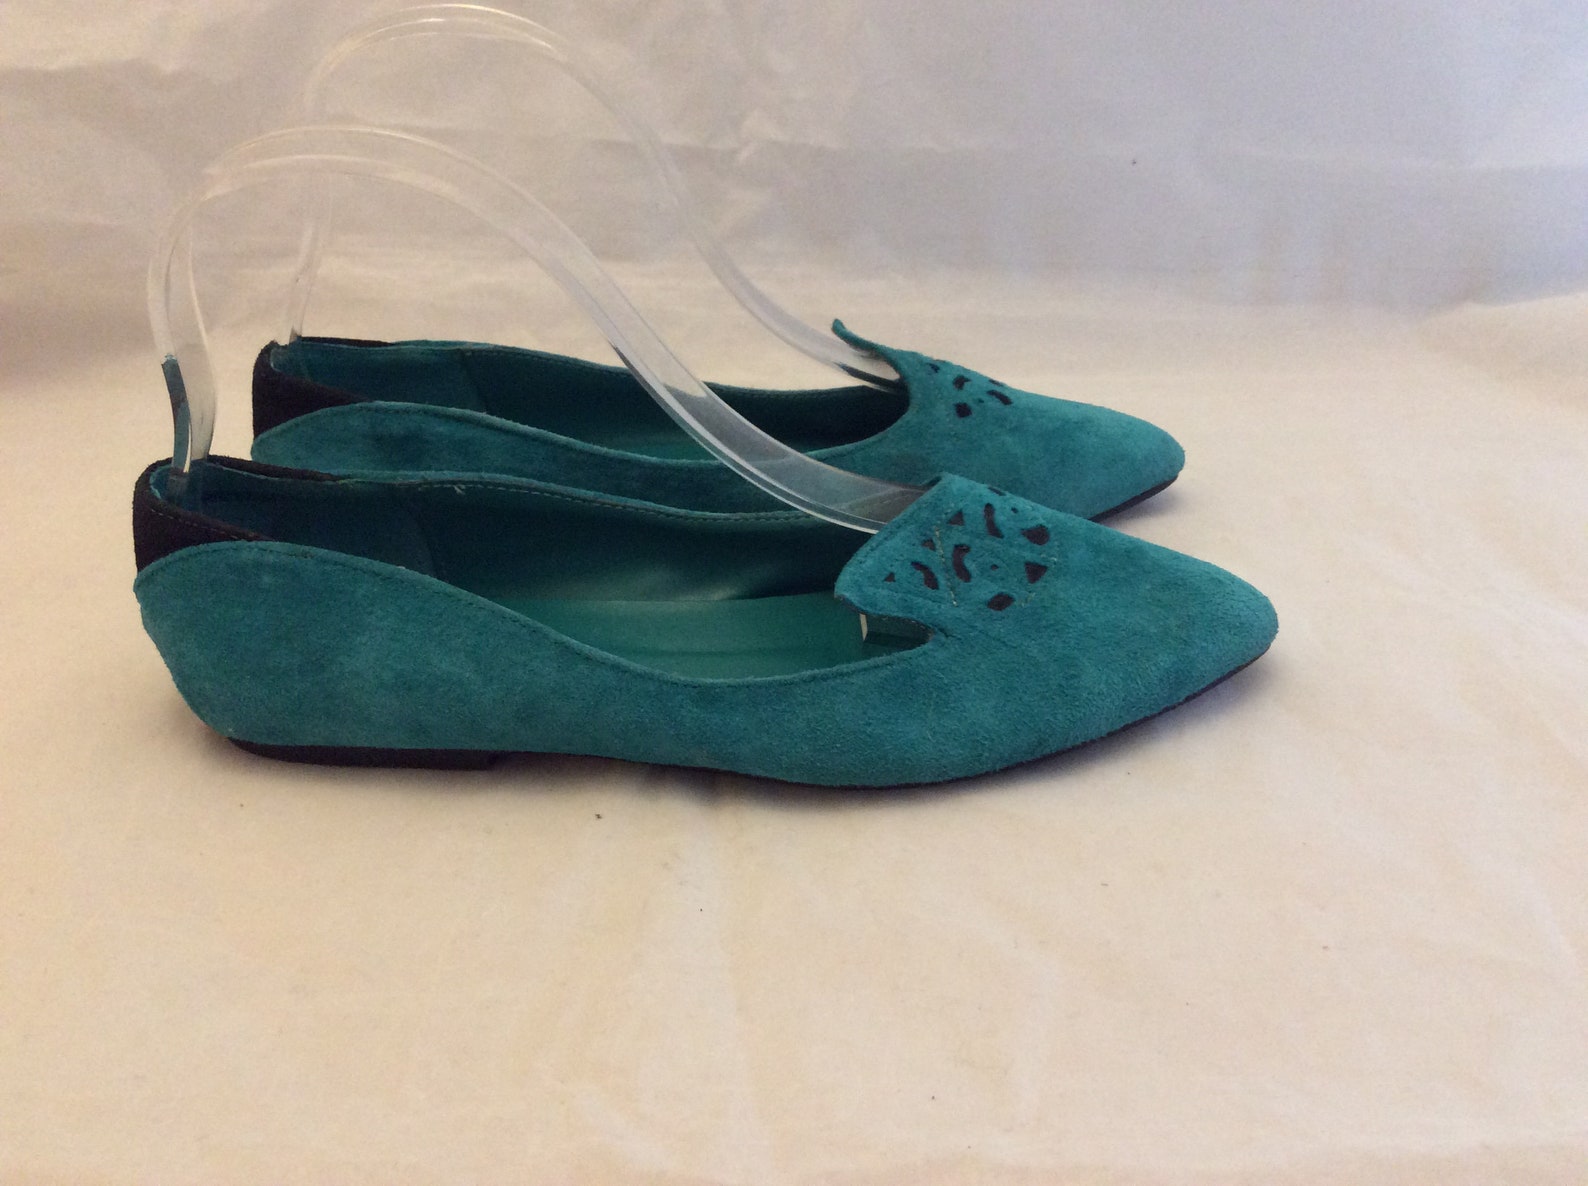 funky cut leather blue flats 80s ballet pointy by wildcard teal size 9 punk ook rare